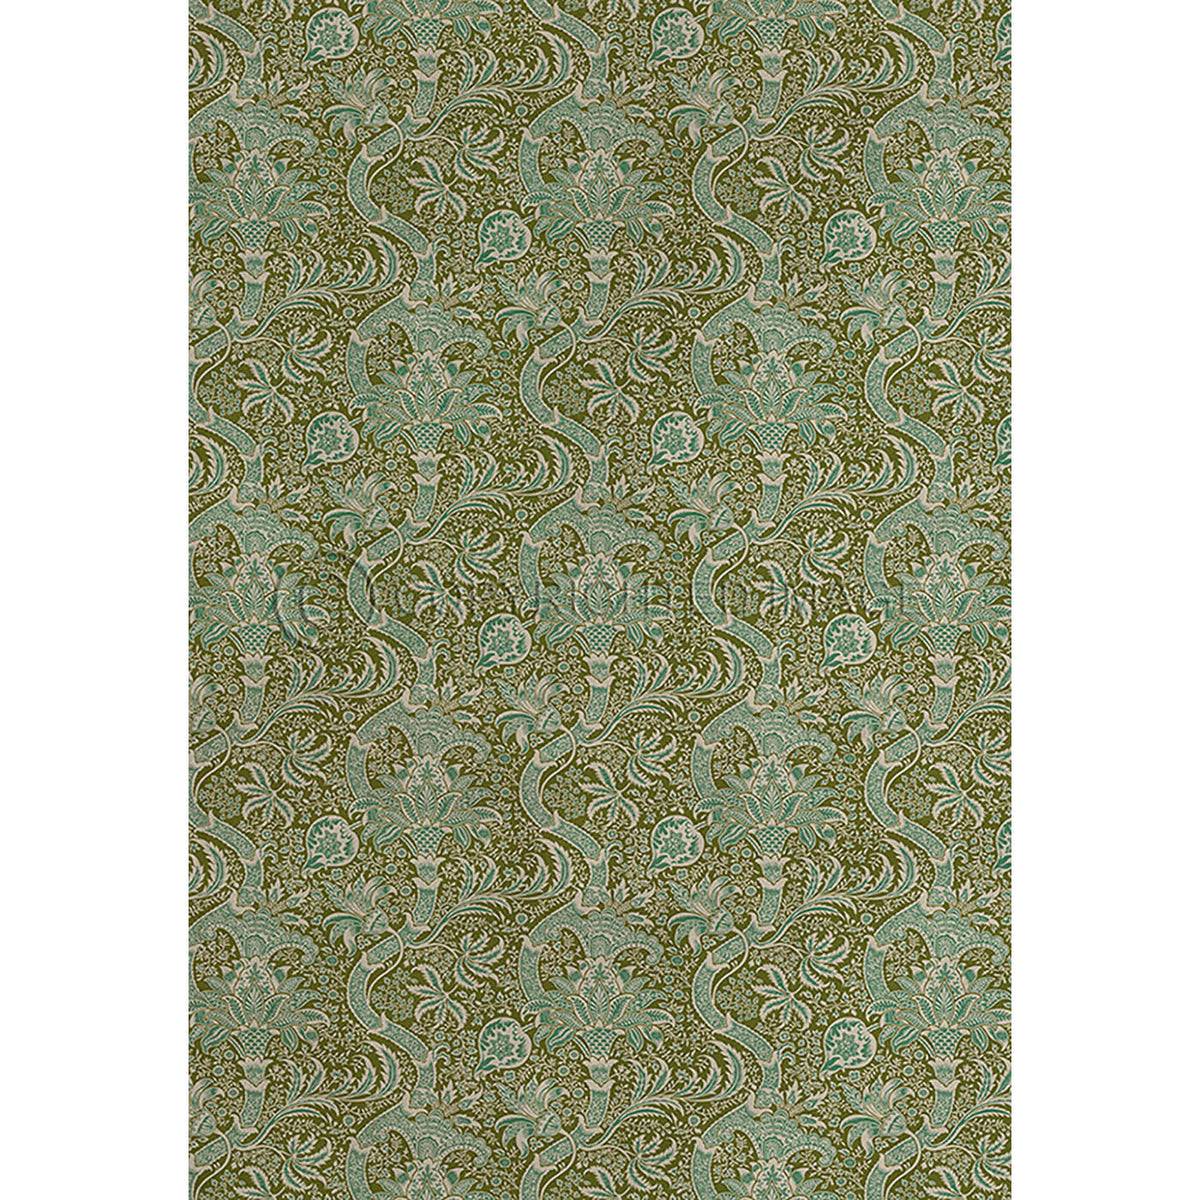 Indian Olive and Teal 96x140